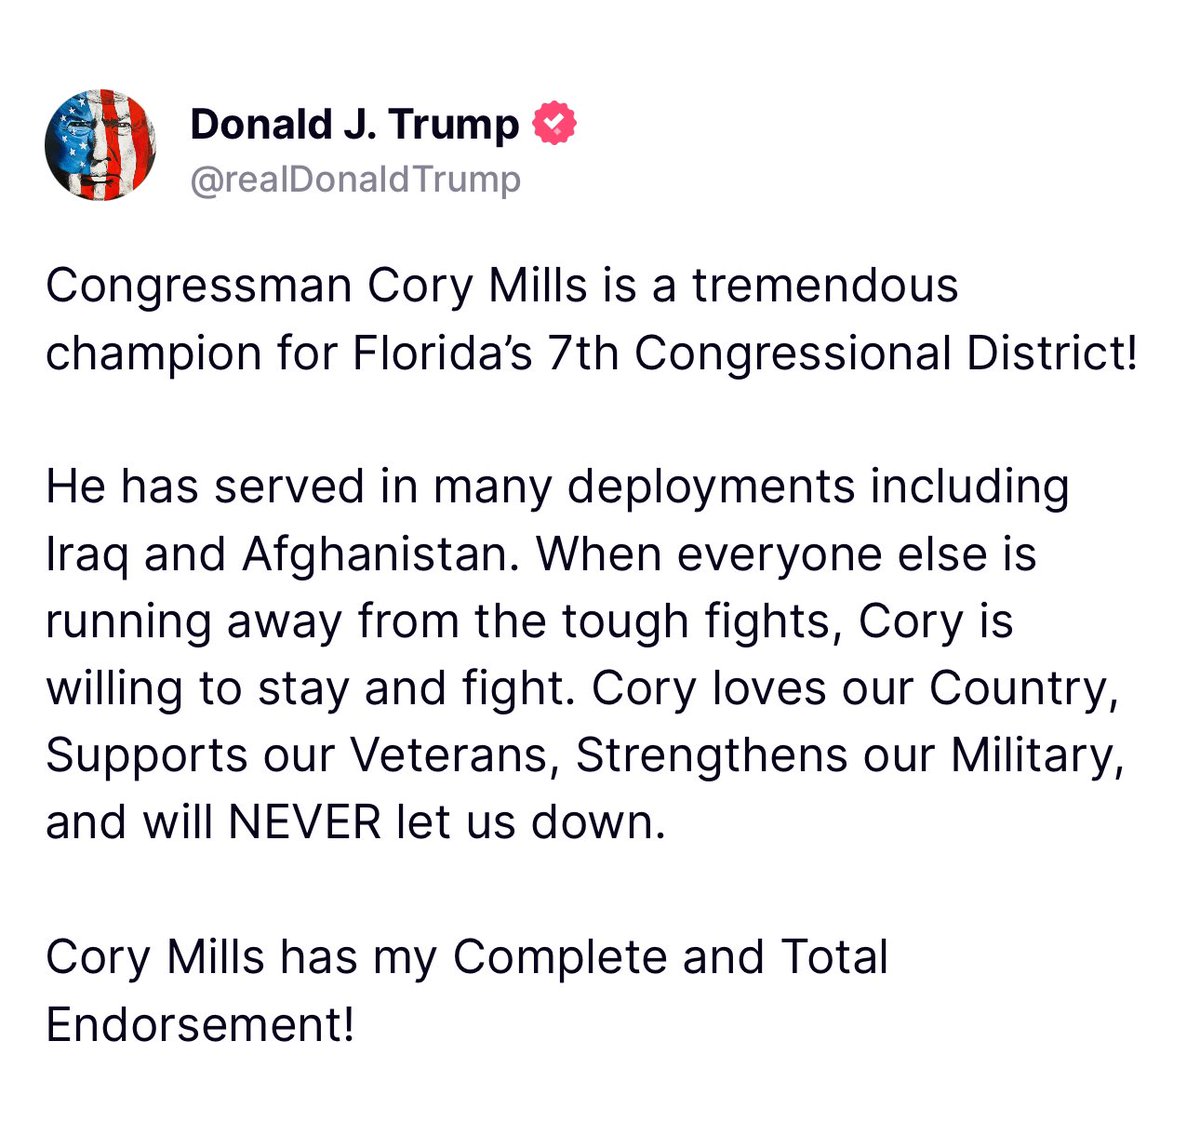 Thank you @realDonaldTrump for your unwavering support. I’m honored to receive your endorsement as I continue my service to our great nation. I look forward to fighting alongside you to secure our borders, build our economy, strengthen our armed forces, and Make America Great